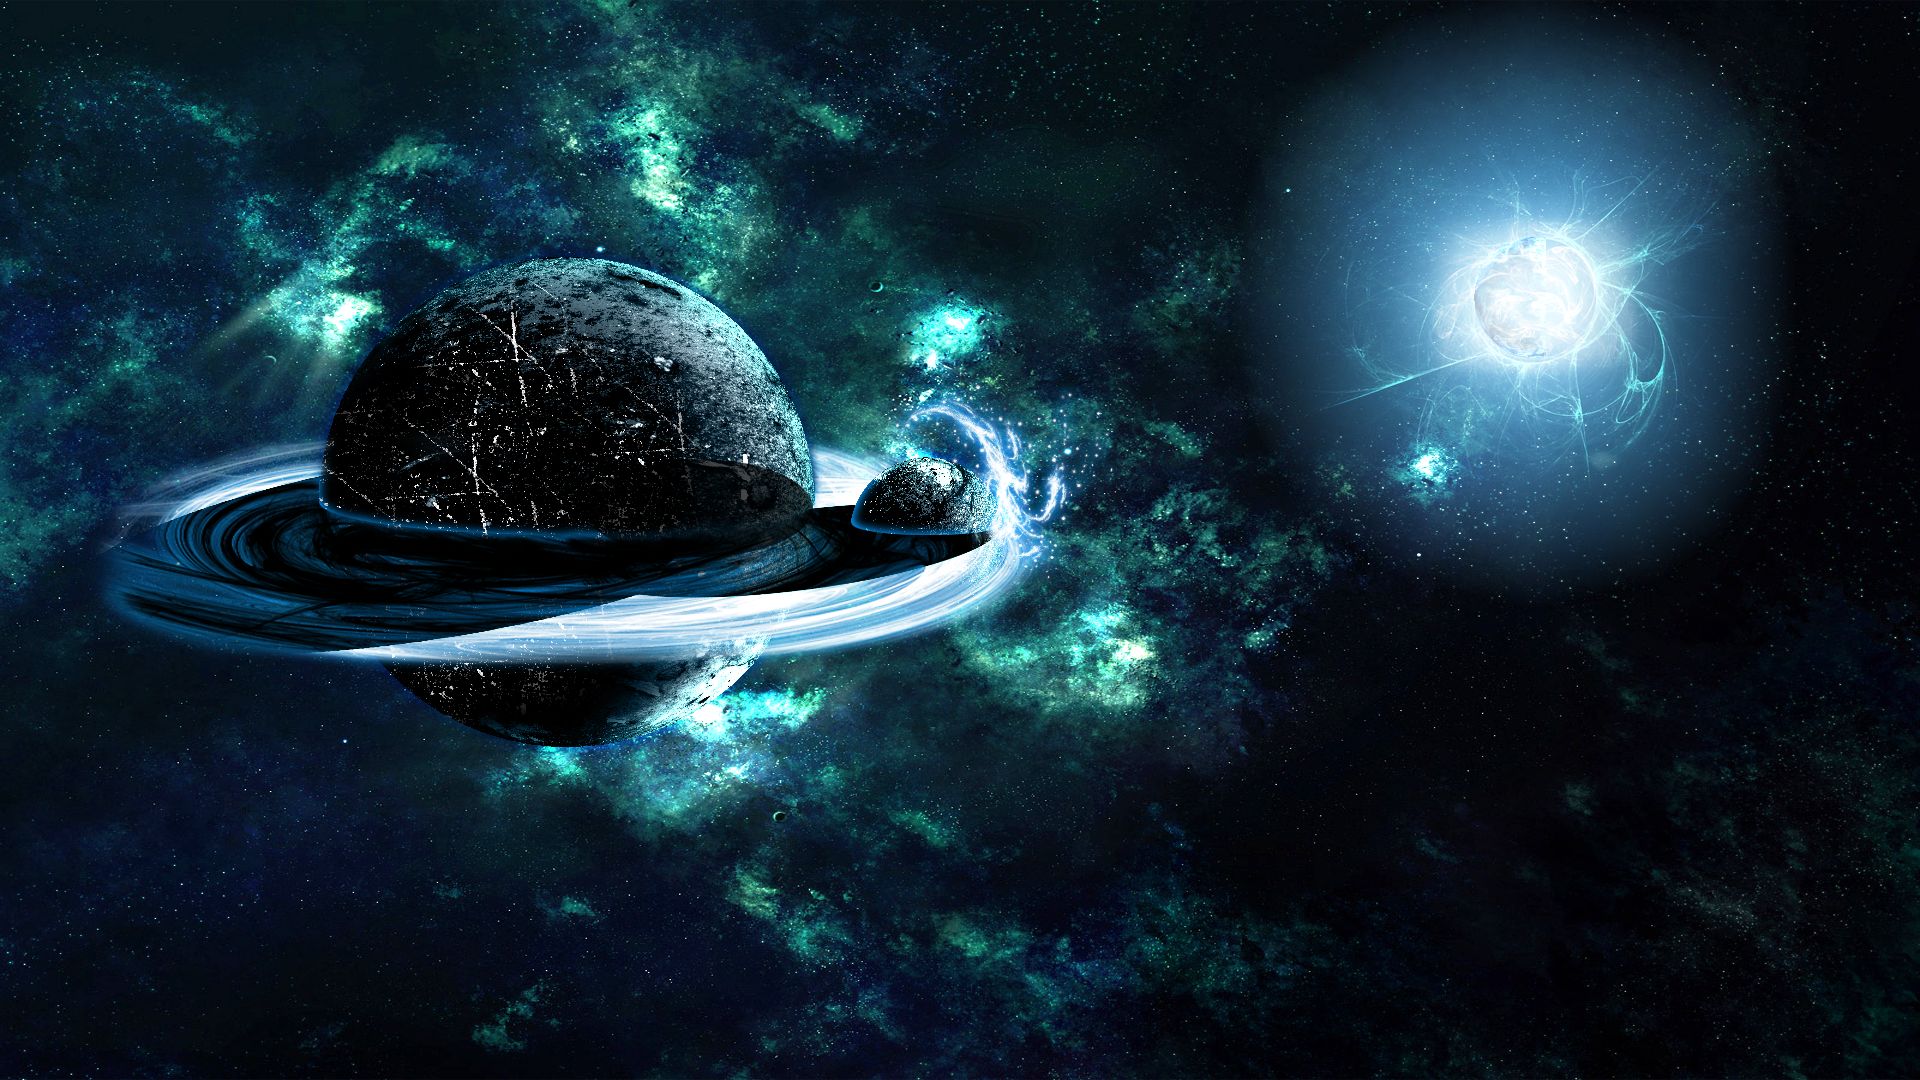 Space Hd Wallpapers For Pc - 1920x1080 Wallpaper 